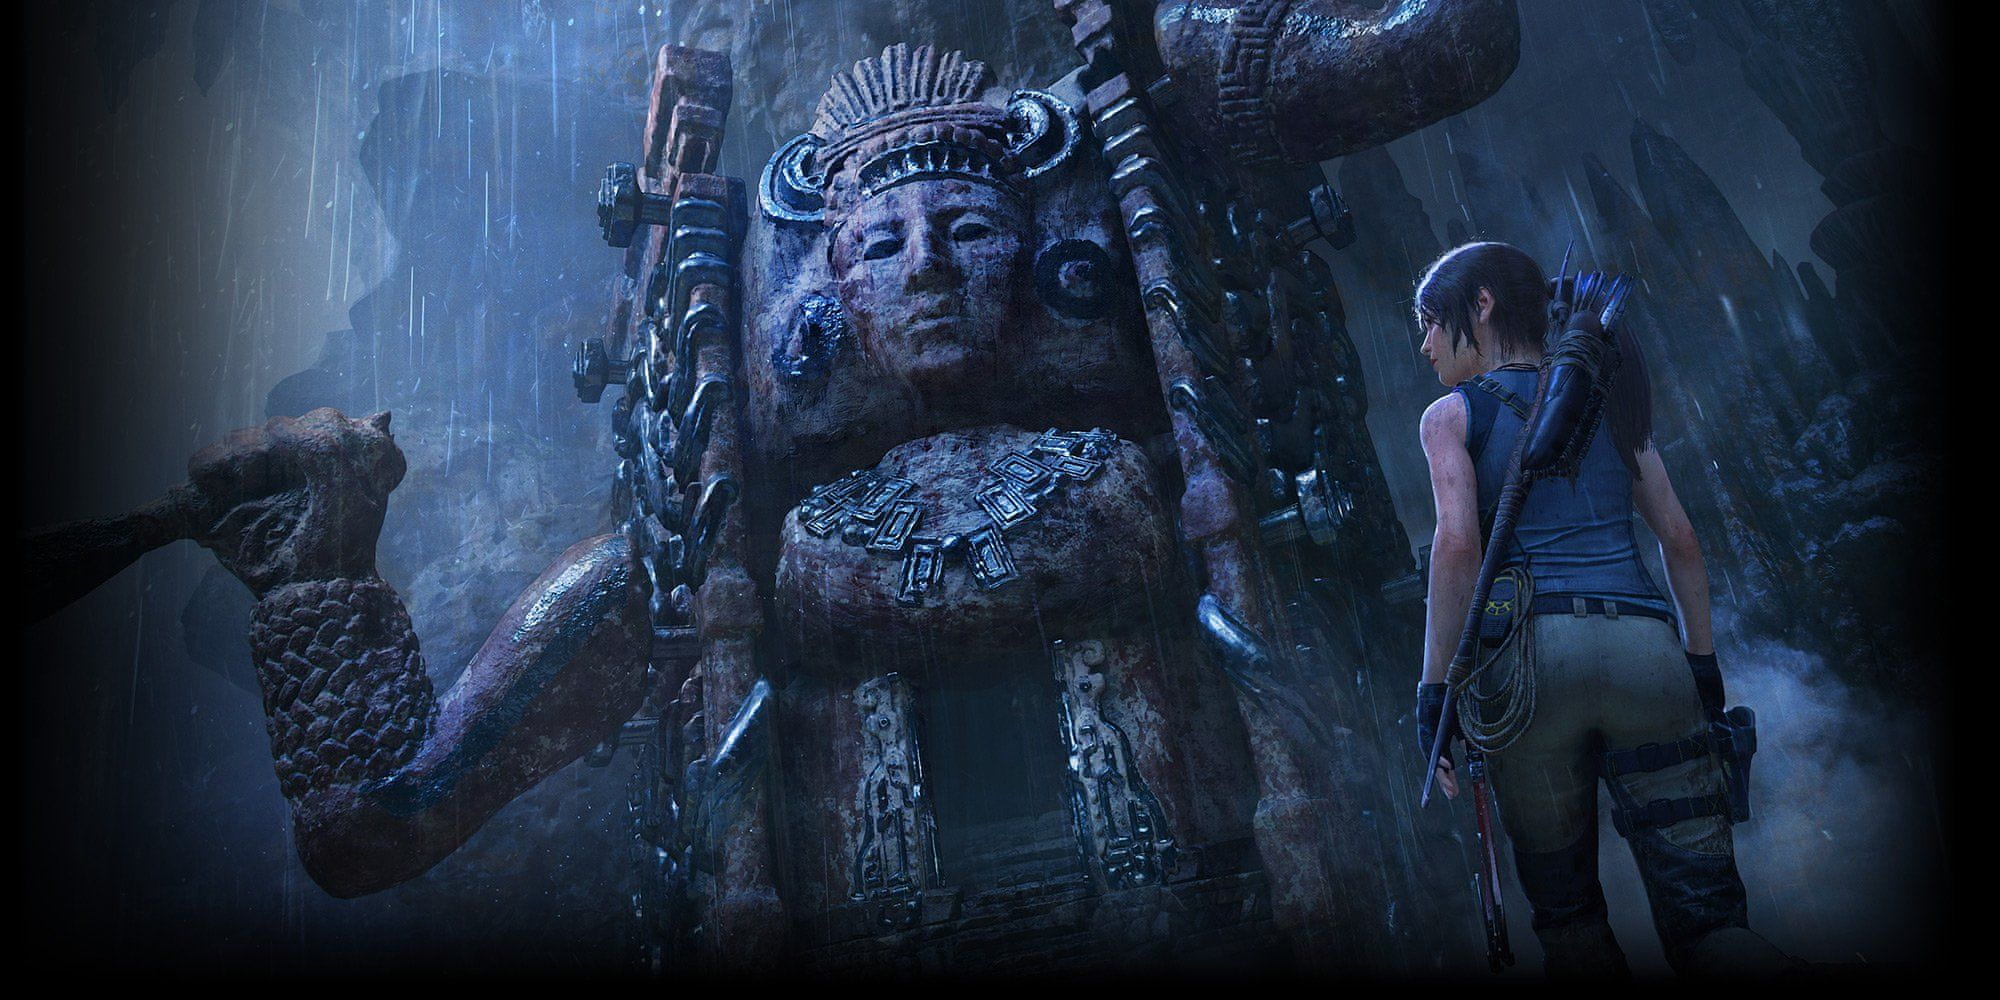 Shadow of the Tomb Raider Definitive Edition, Square Enix, Xbox One, 92304  